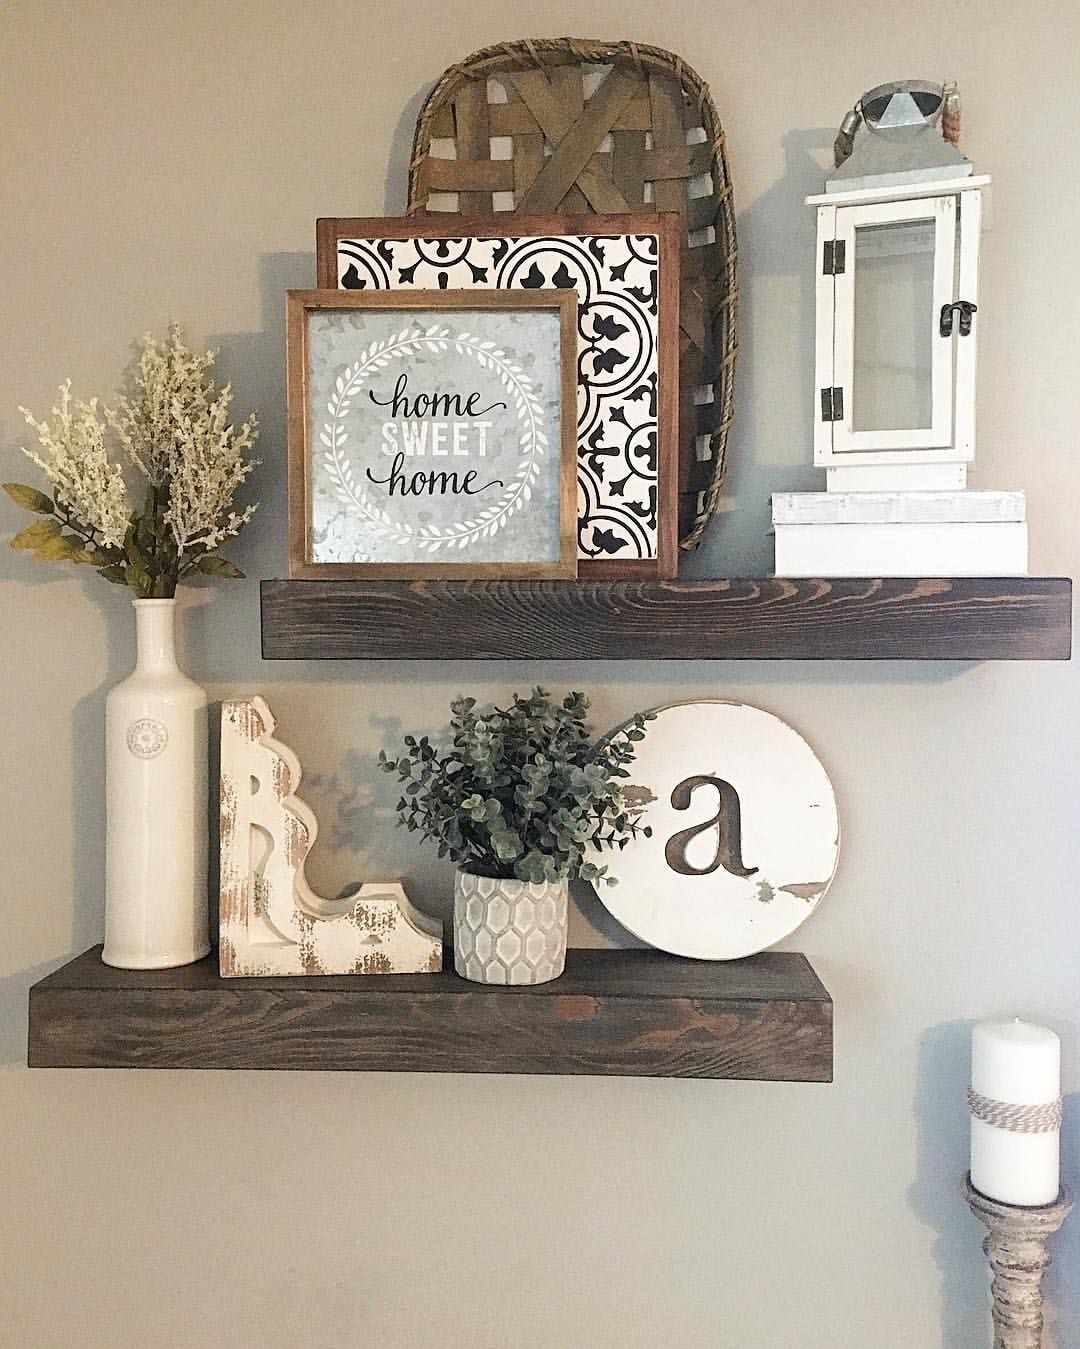 Floating shelves, floating shelves decor, shelf decor, lantern, tobacco basket, tile sign, home sweet home sign, monogram round, greenery, faux greenery, corbel, farmhouse decor, farmhouse style, modern farmhouse, living room, living room decor, winter decor, all year decor, neutral decor, neutral farmhouse decor,   See Instagram photos and videos from Robin Norton (@rock.n.robs) -   25 rock style room
 ideas